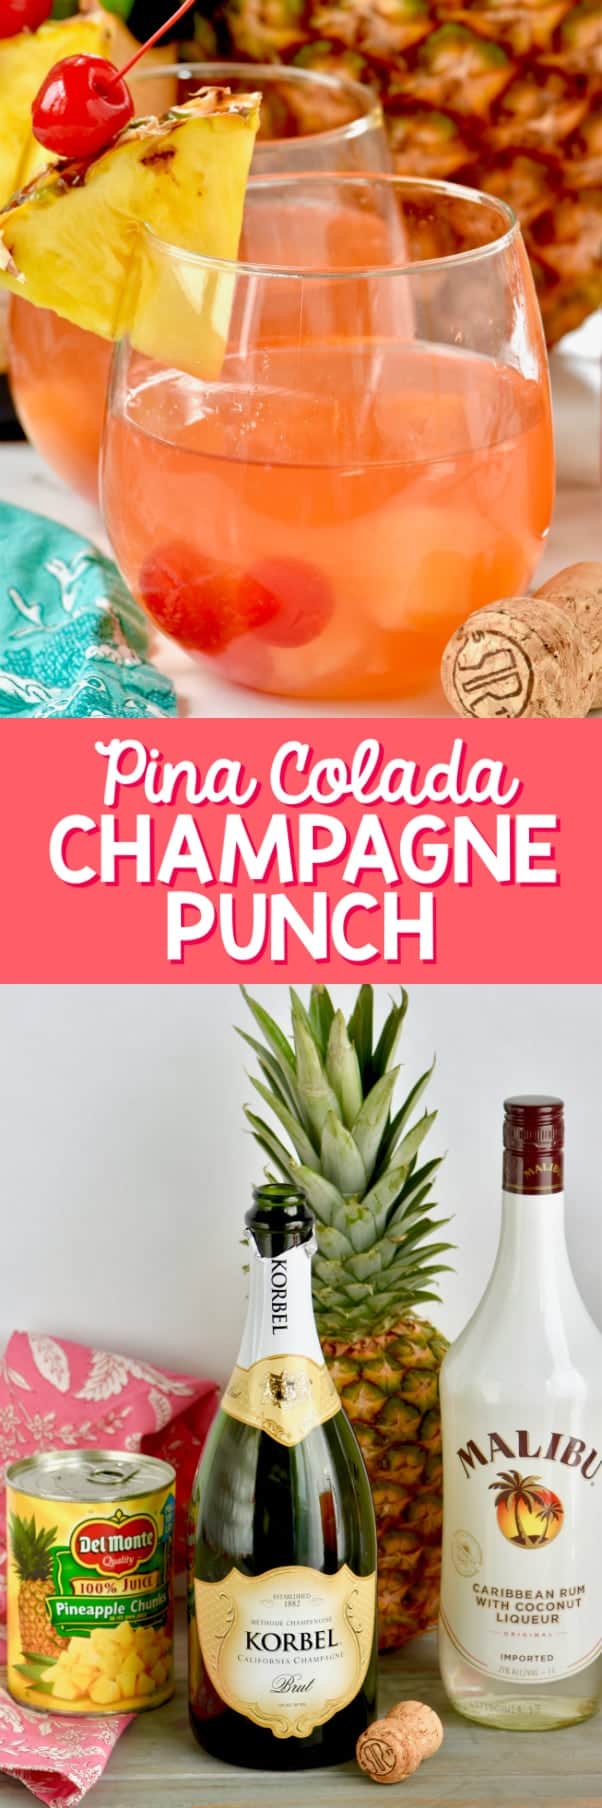 A collage of two pictures: the top showing two glasses of the Pina Colada Champagne punch garnished with slice pineapple and maraschino cherry, and the bottom photo showing the ingredients of the drink. 